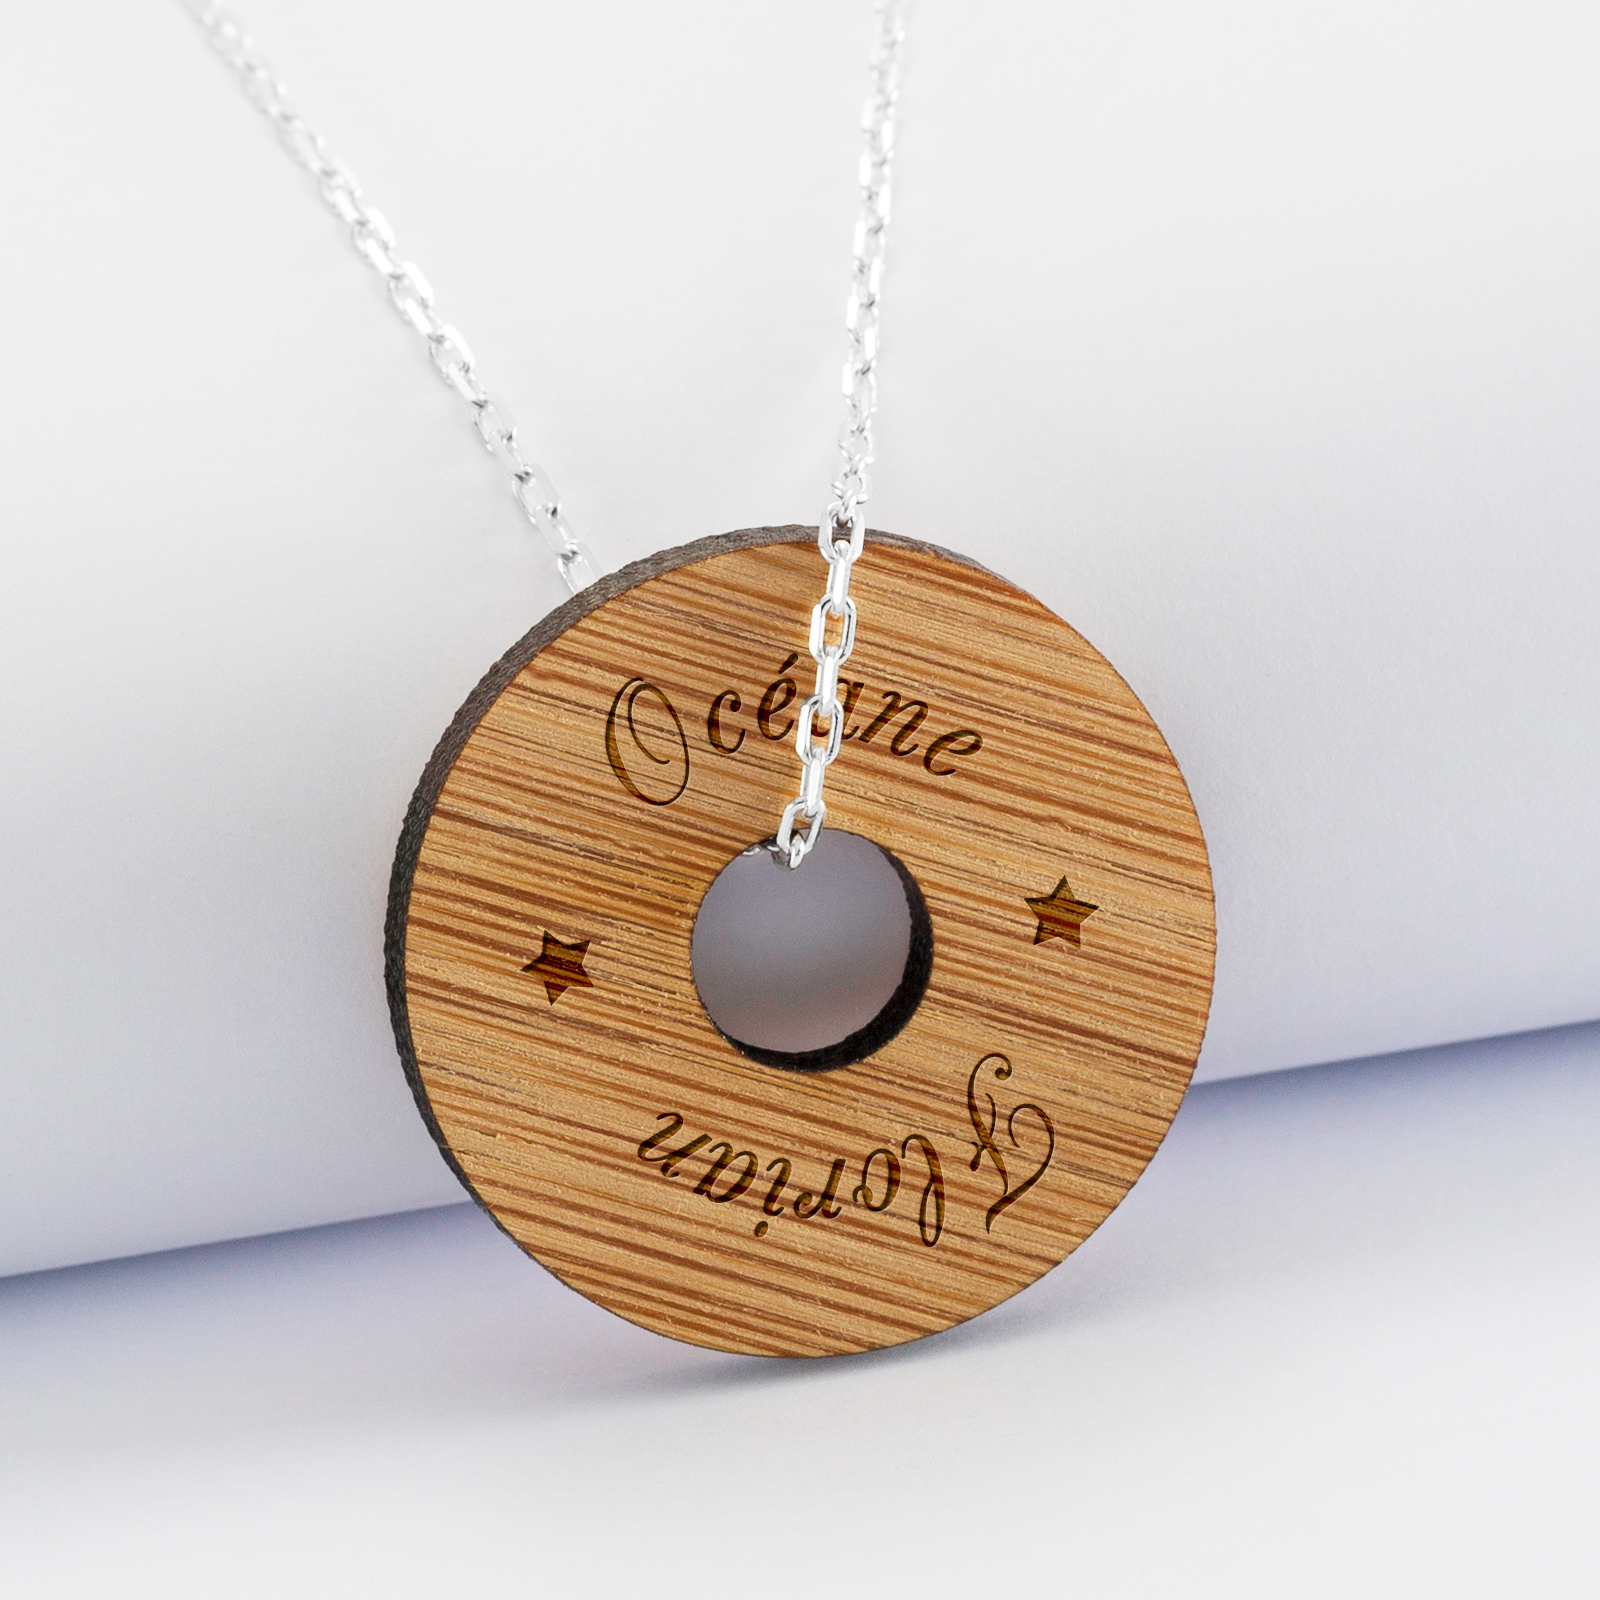 Personalised engraved wooden heart medallion pendant 28mm - 1